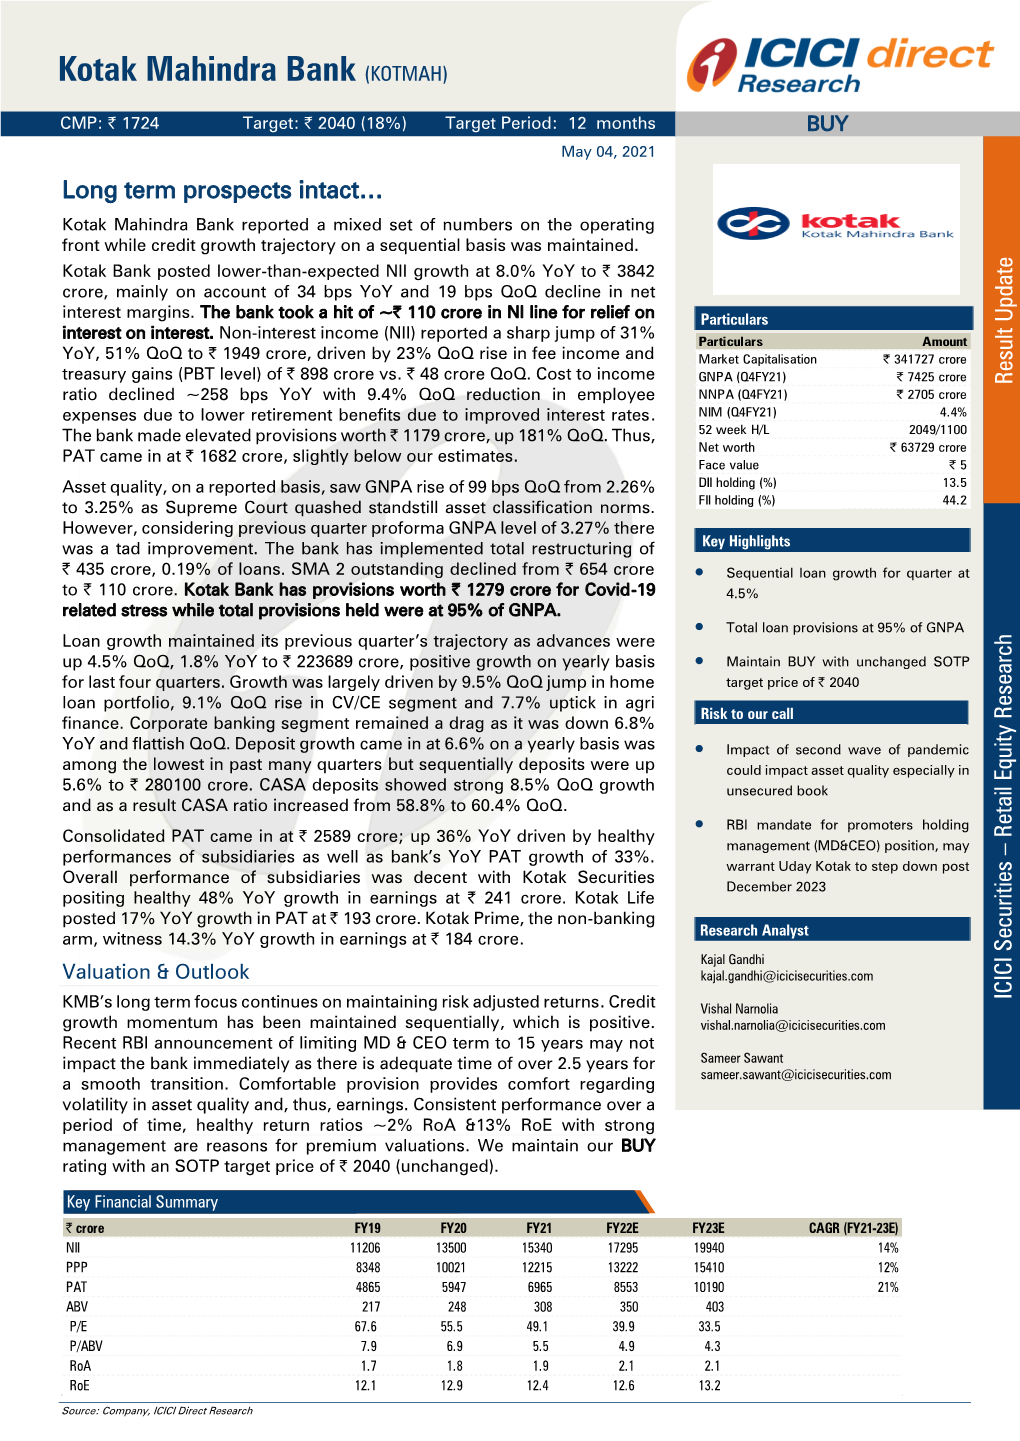 Result Update | Kotak Mahindra Bank ICICI Direct Research